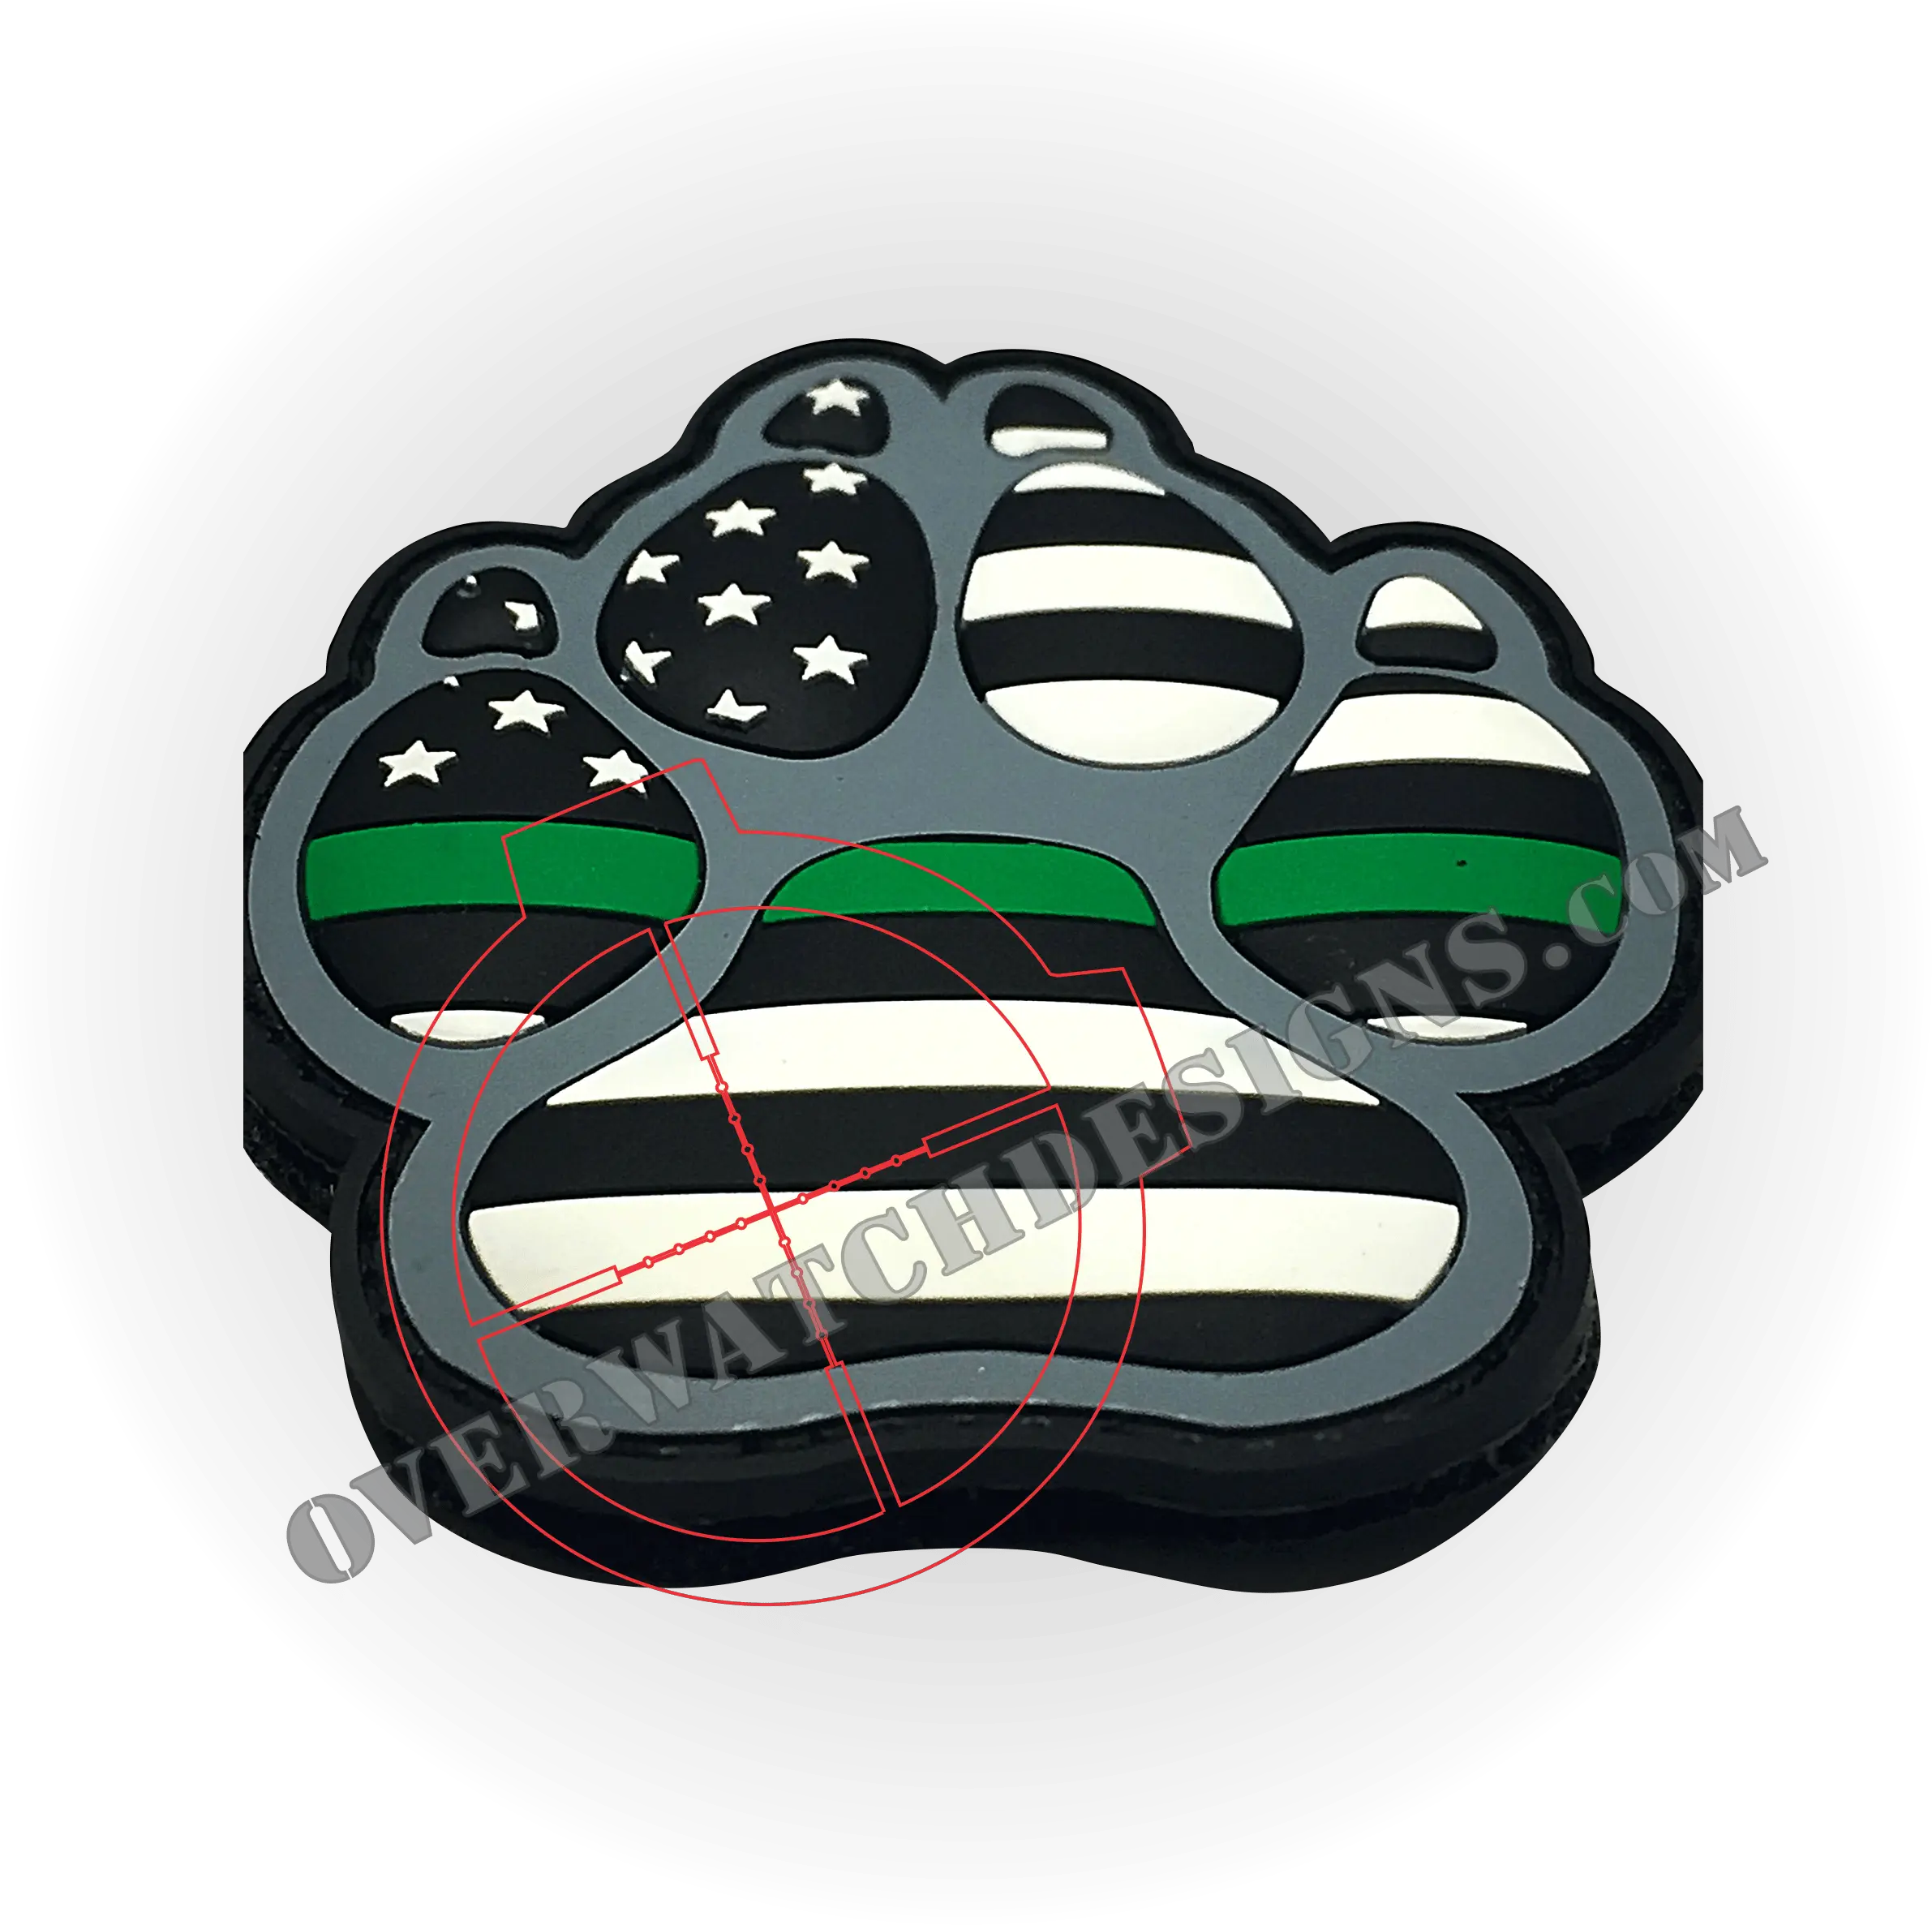 Download Thin Green Line K9 Patch Illustration Hd Png Illustration Thin Line Png